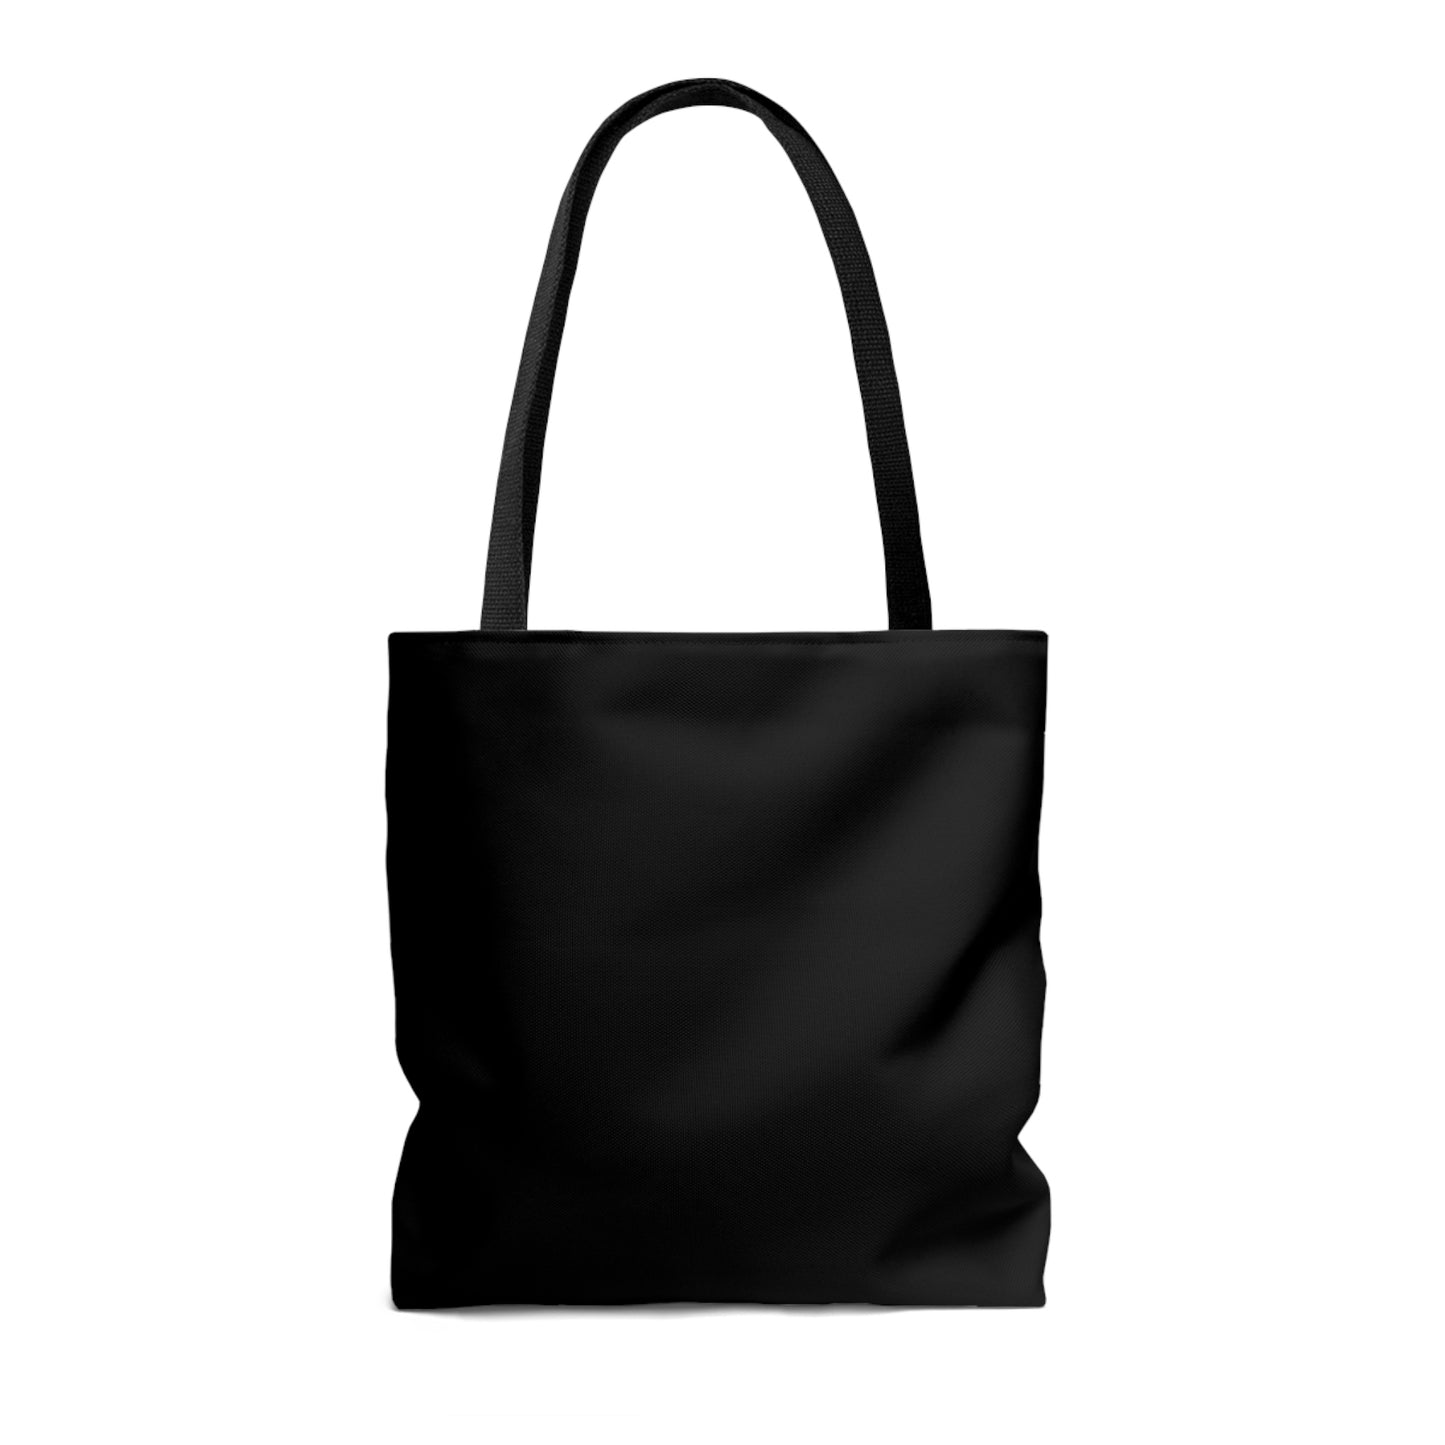 Armed By Faith Shielded By Prayer Tote Bag